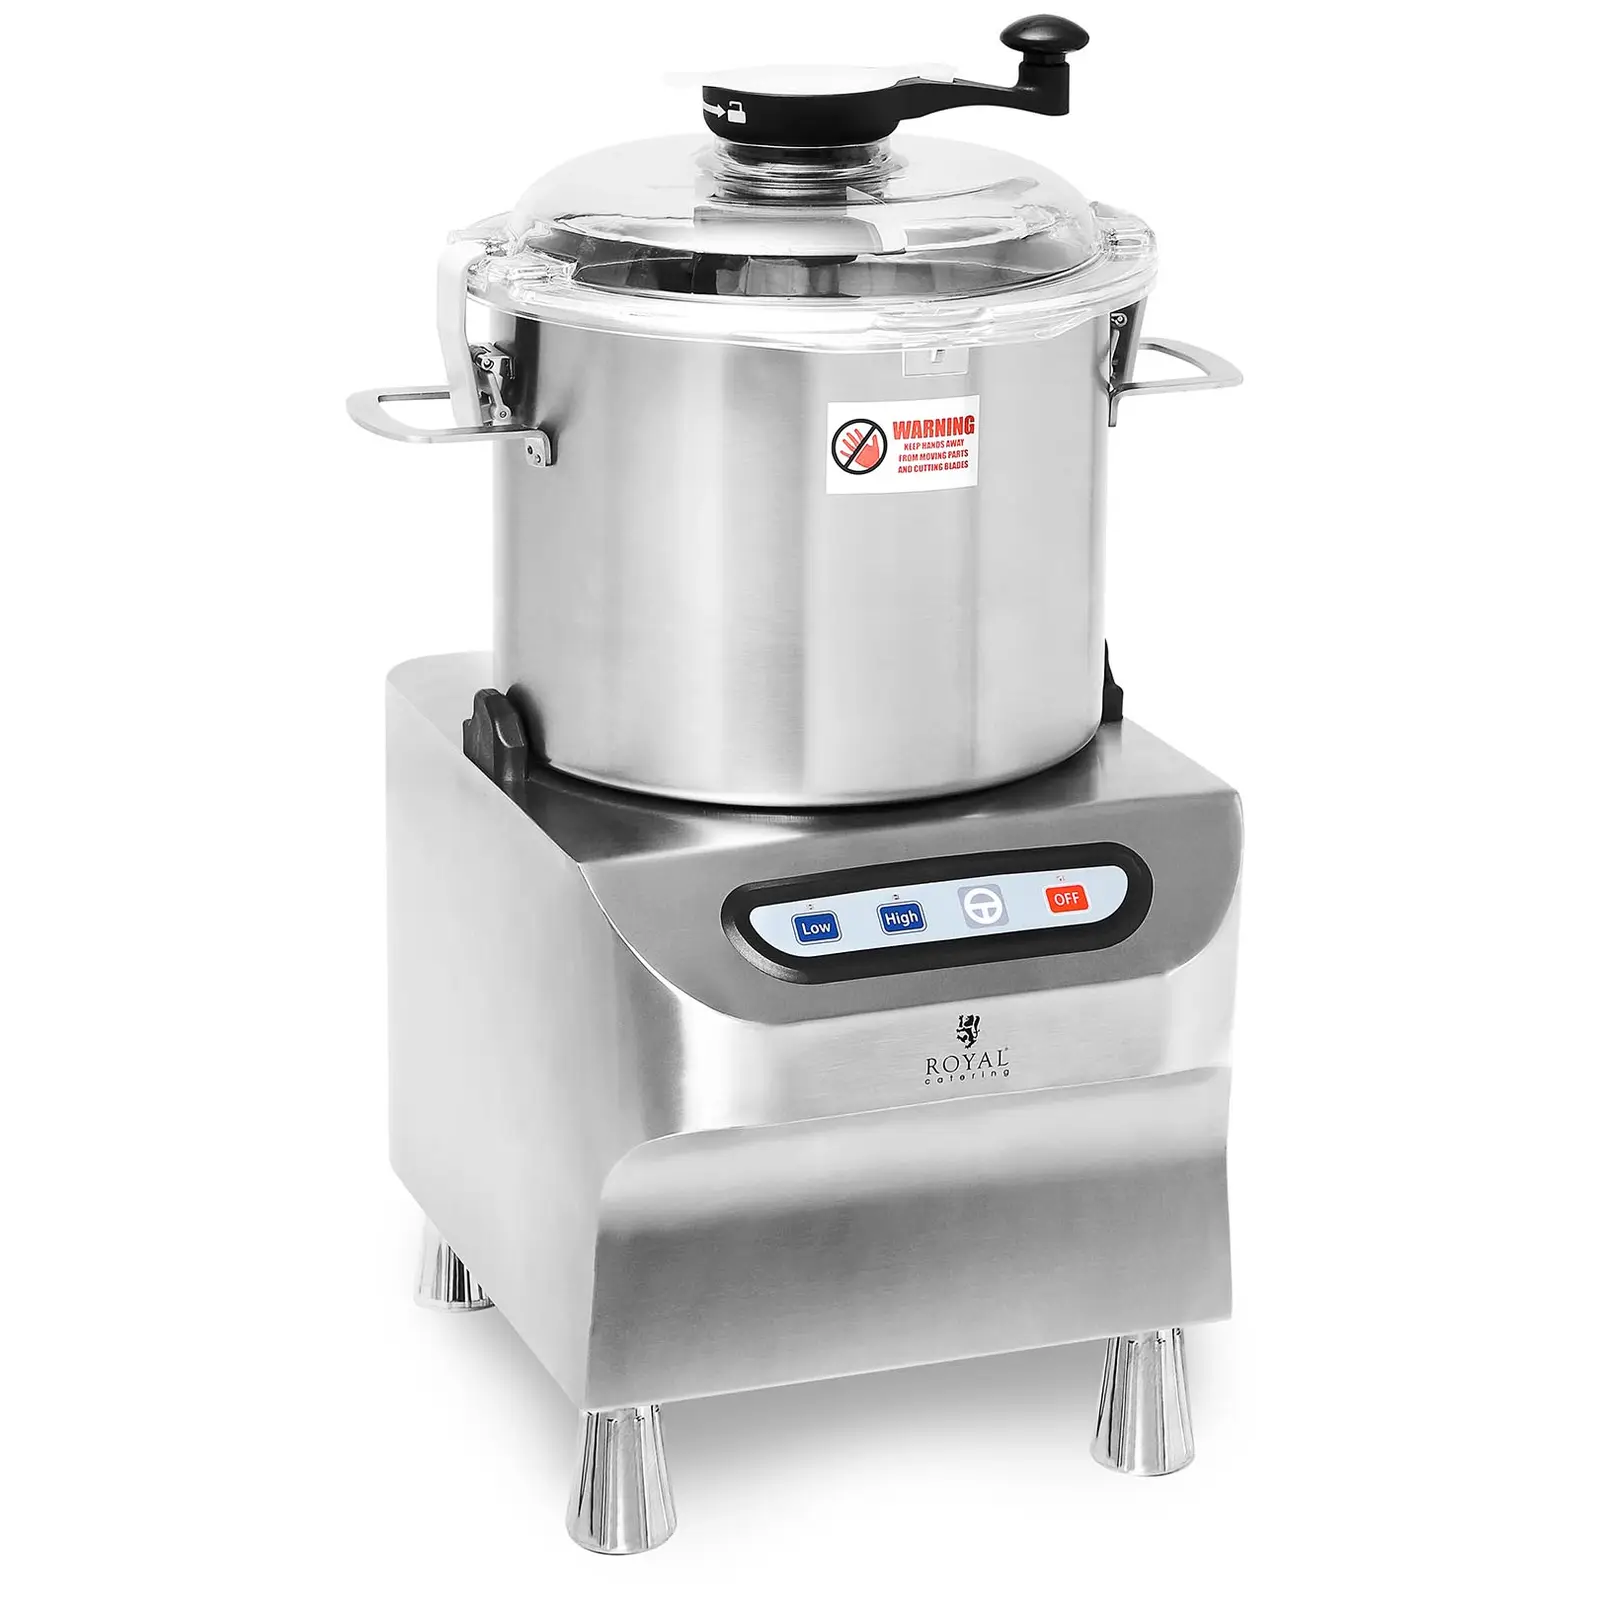 Tafelsnijder - 1500/2200 RPM - Royal Catering - 12 l